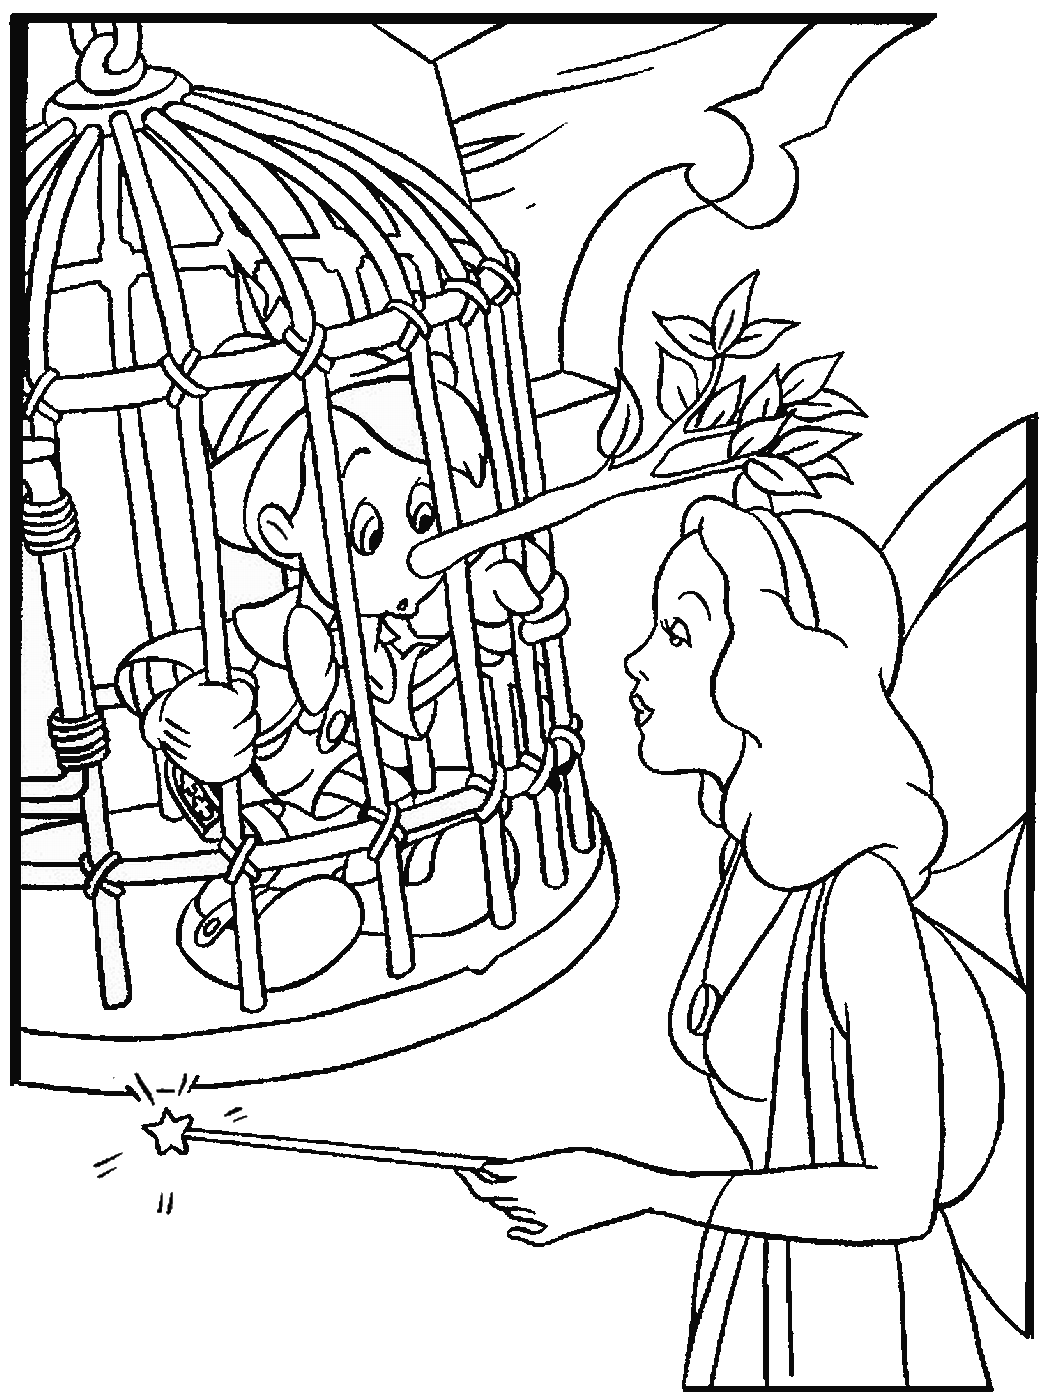 Pinocchio Coloring Pages TV Film Pinocchio_coloring_3 Printable 2020 06333 Coloring4free